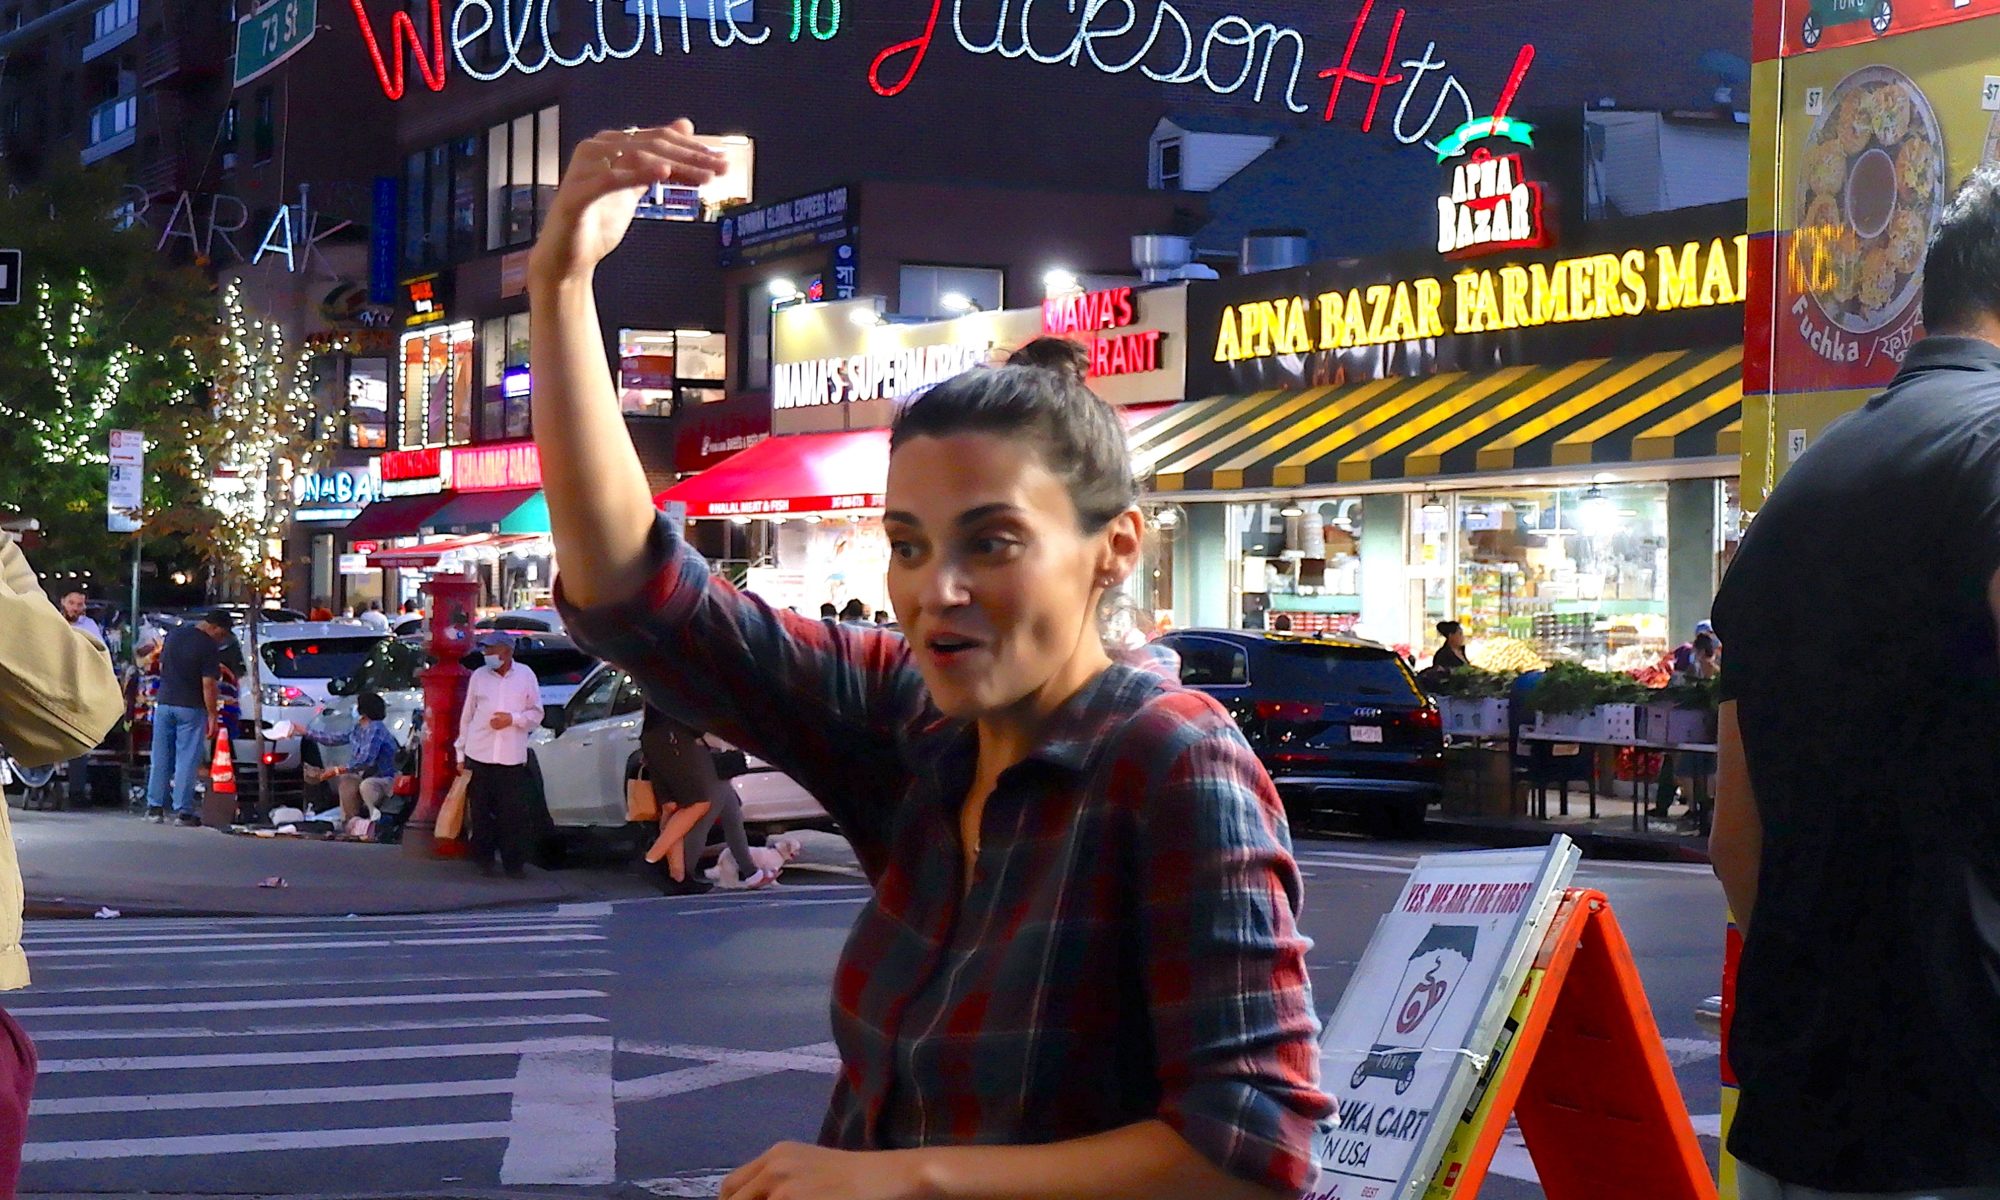 Amanda, a woman wearing a plaid shirt speaking to a group with one hand over her head, and a lighted sign over the street behind her that says "Welcome to Jackson Heights"